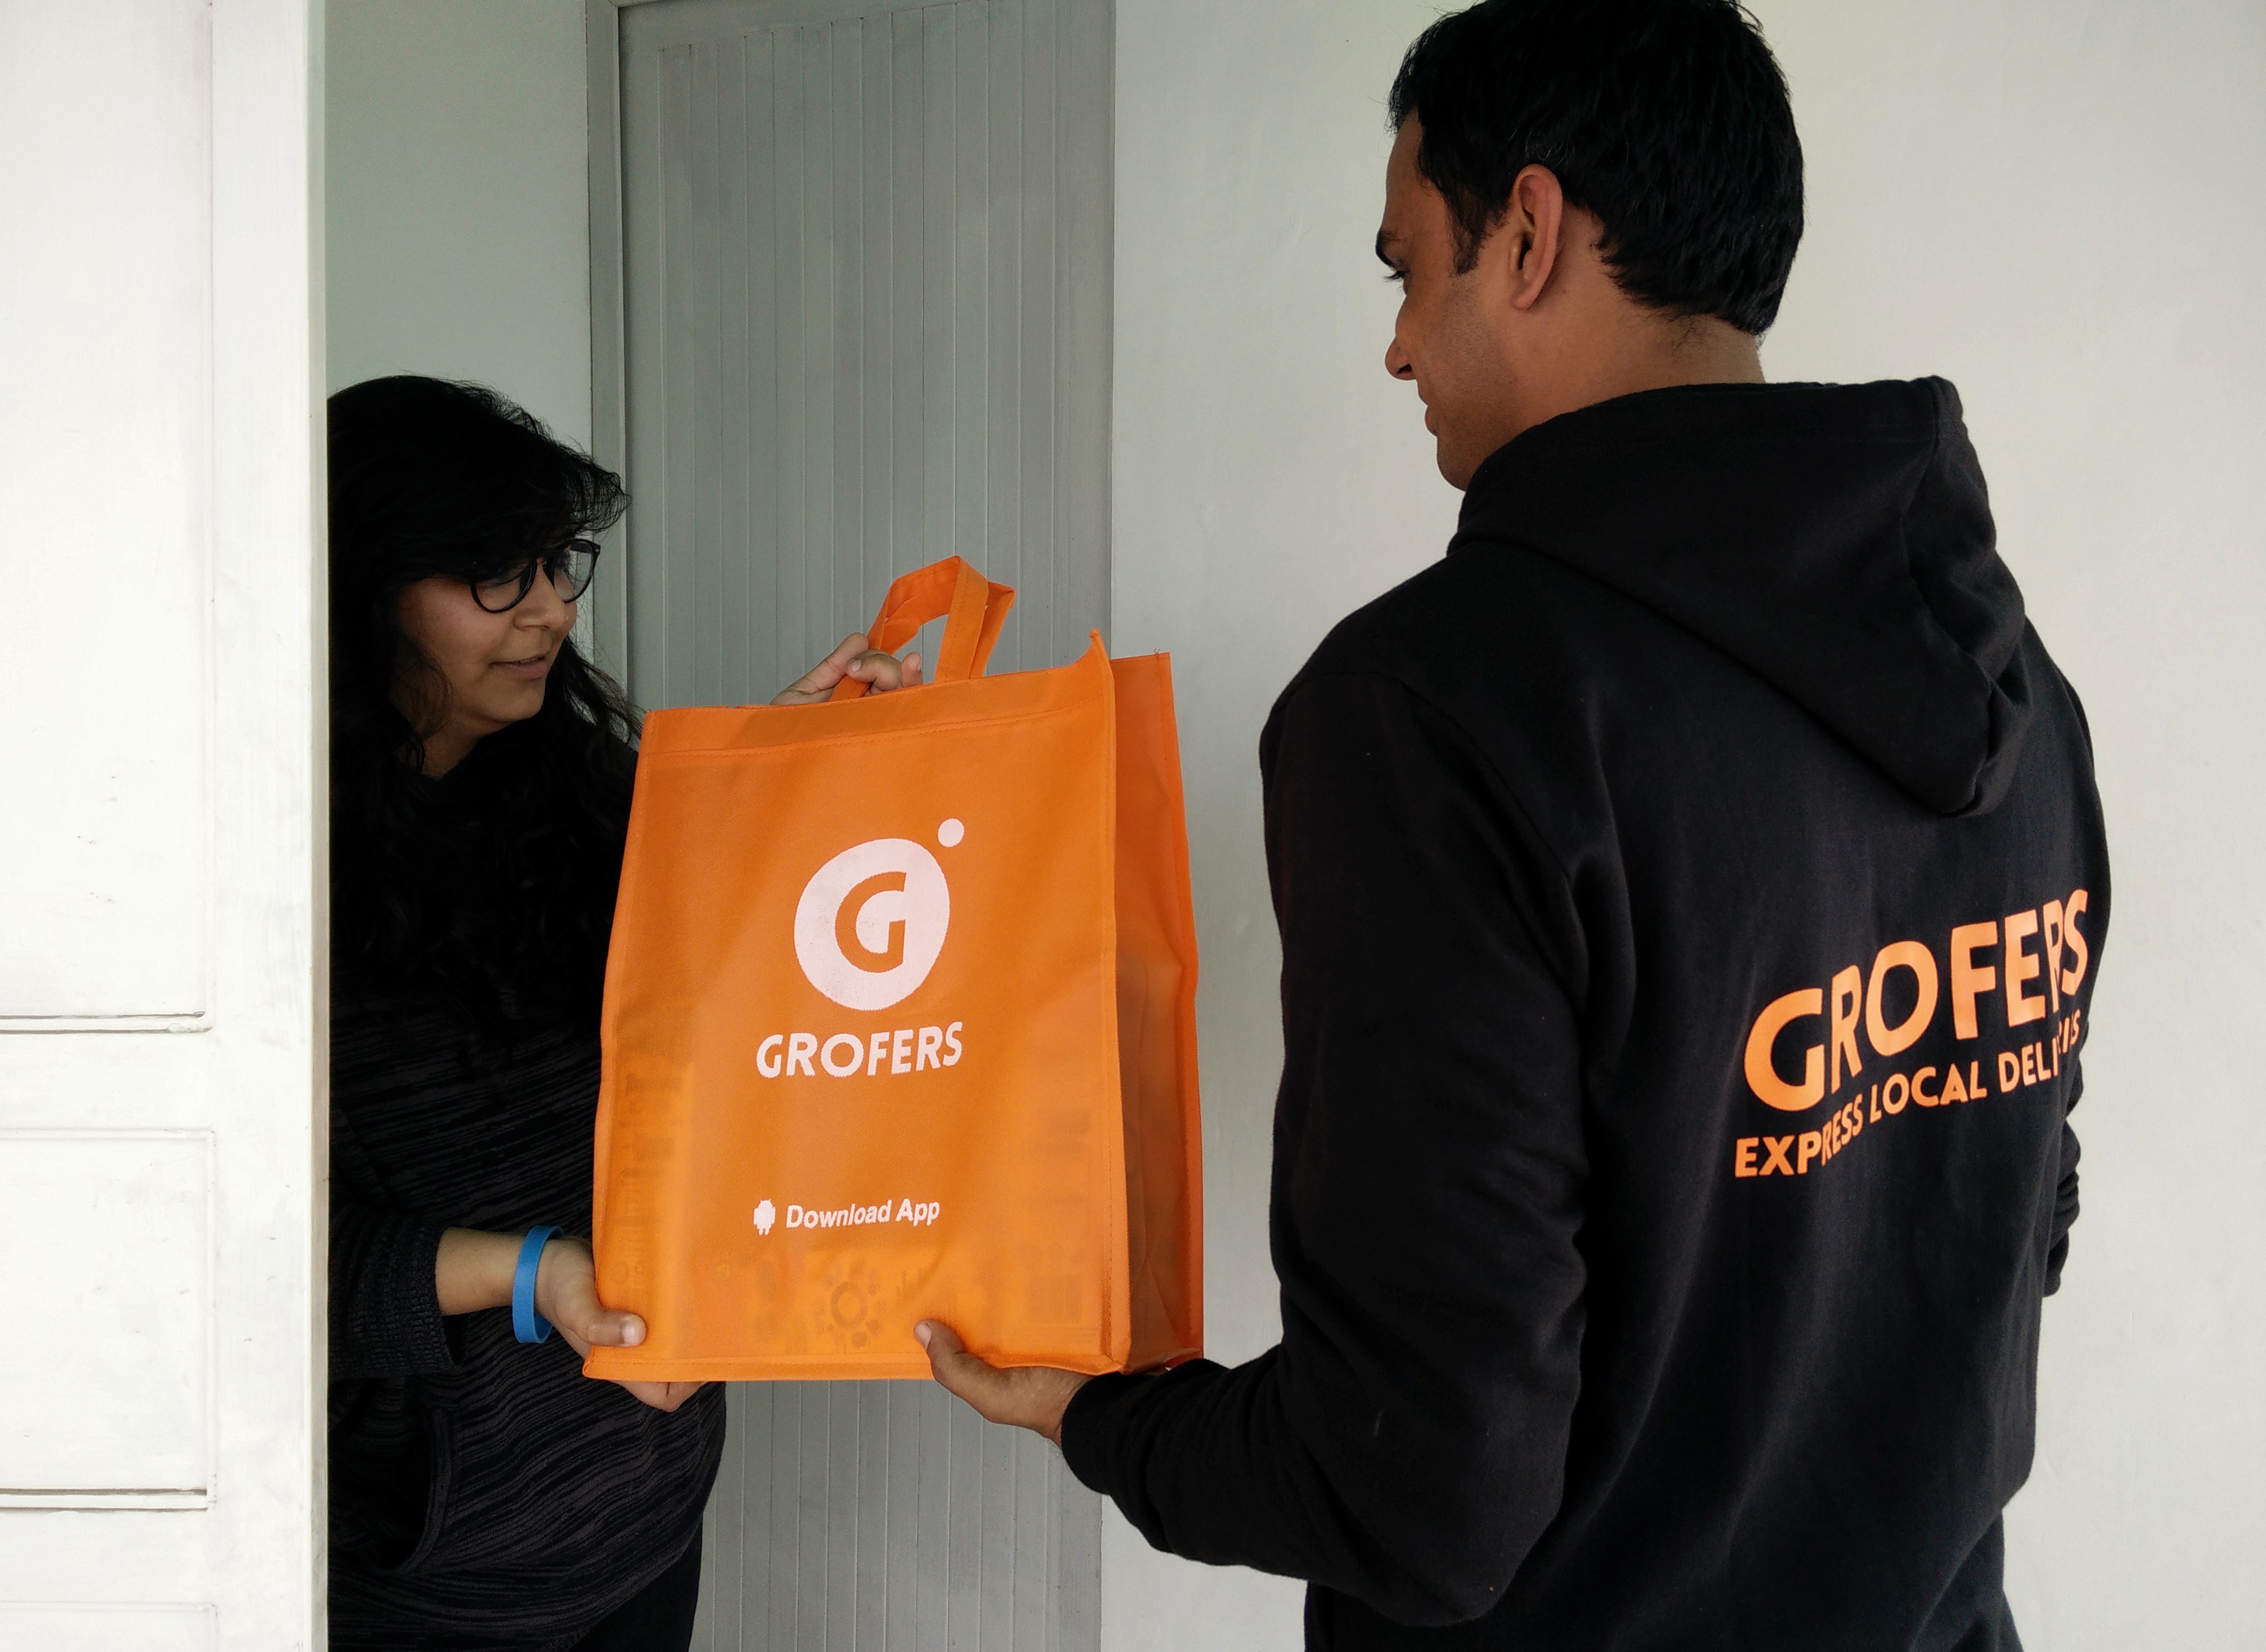 Users offers. "Grofers".